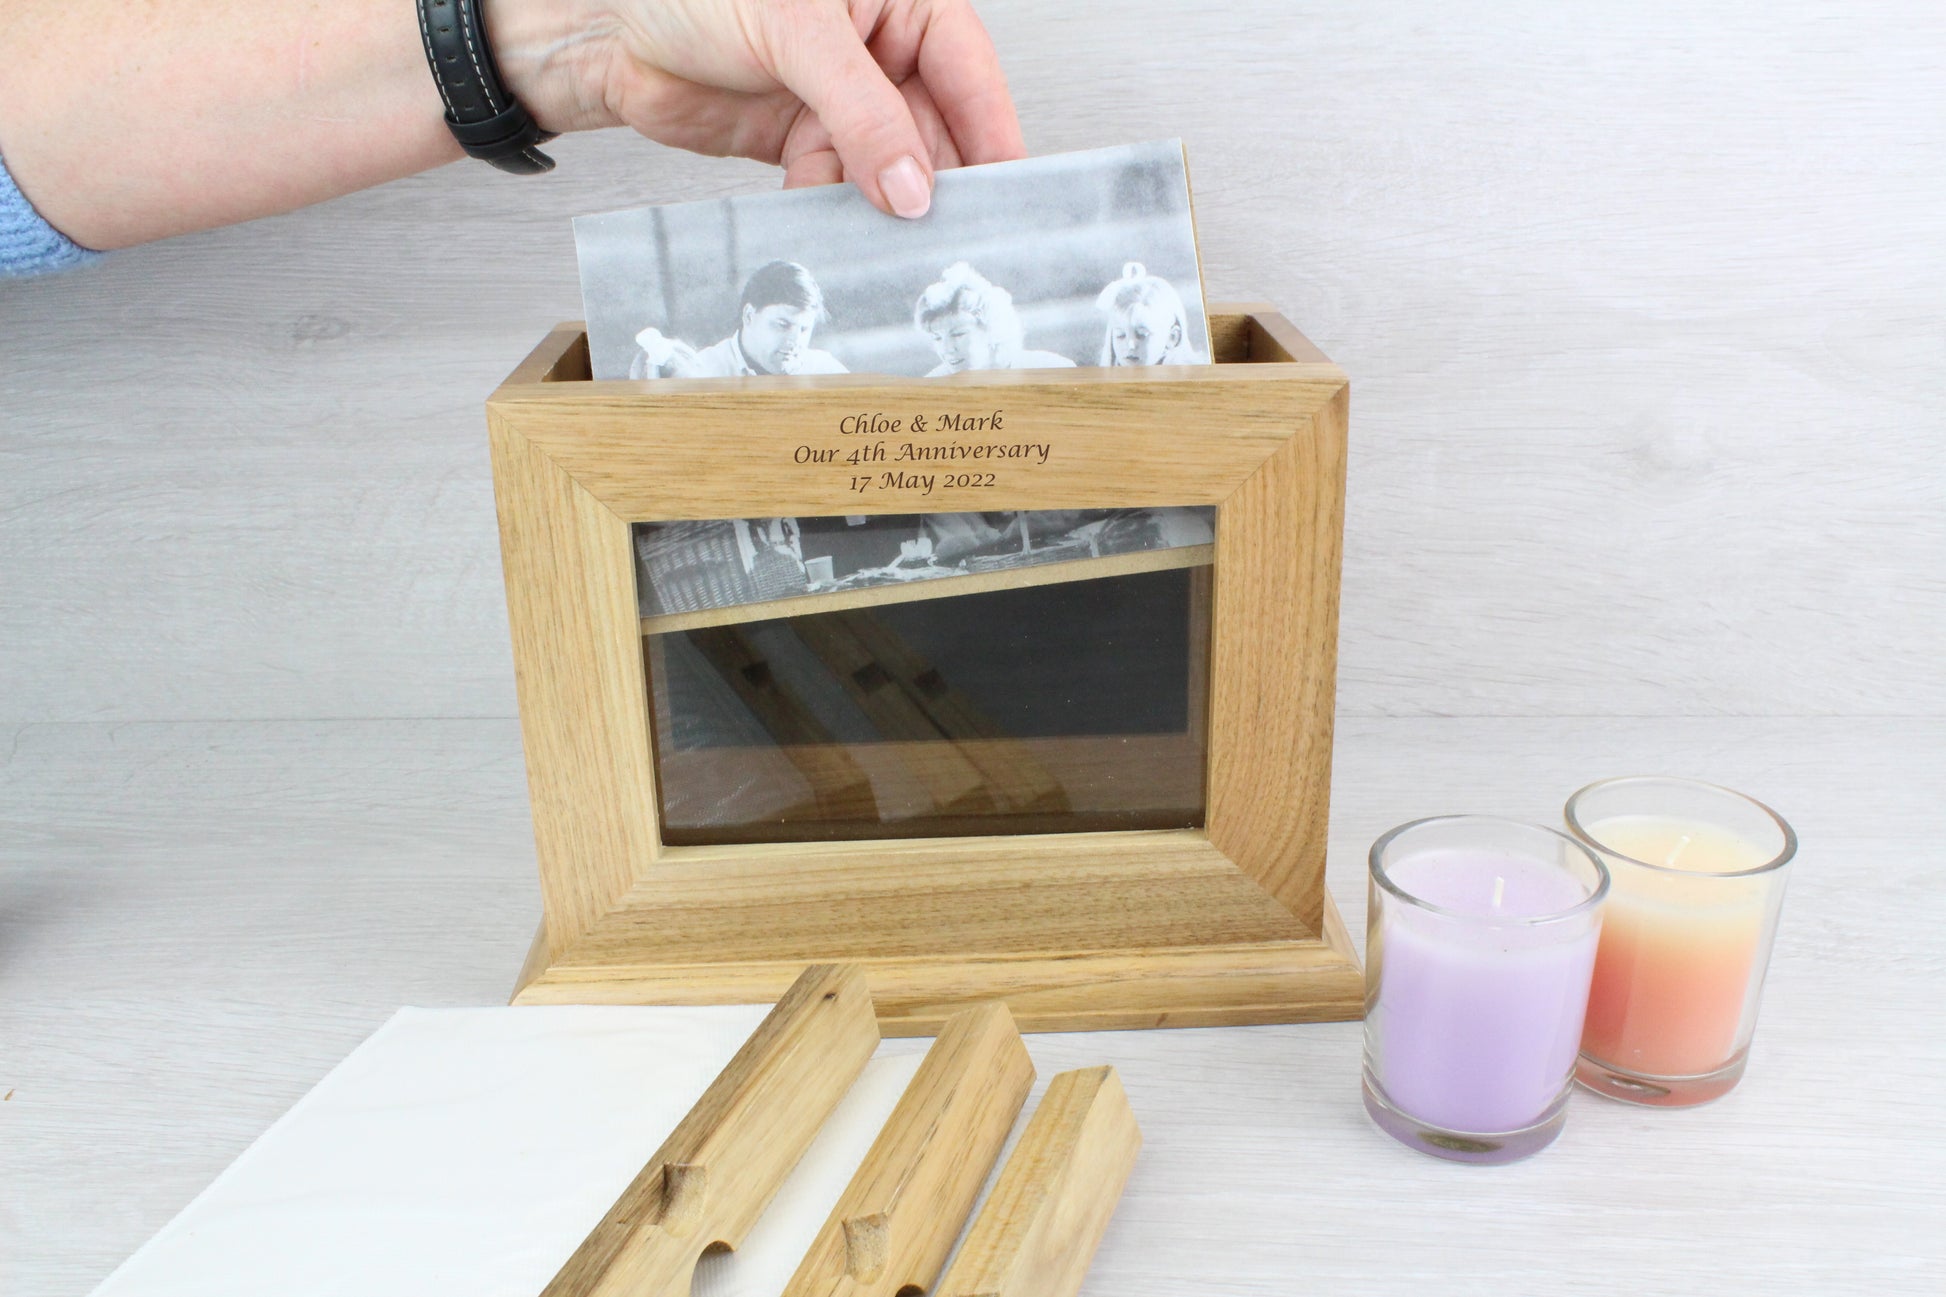 Demonstrating of how to insert the photo inside the ﻿Personalised Oak Wooden Photo Frame and Album Holder with a text engraving that says "Chloe & Mark Our 4th Wedding Anniversary 17 May 2022" Also, beside the wooden frame, there are two not lighted candles (colour purple and orange).